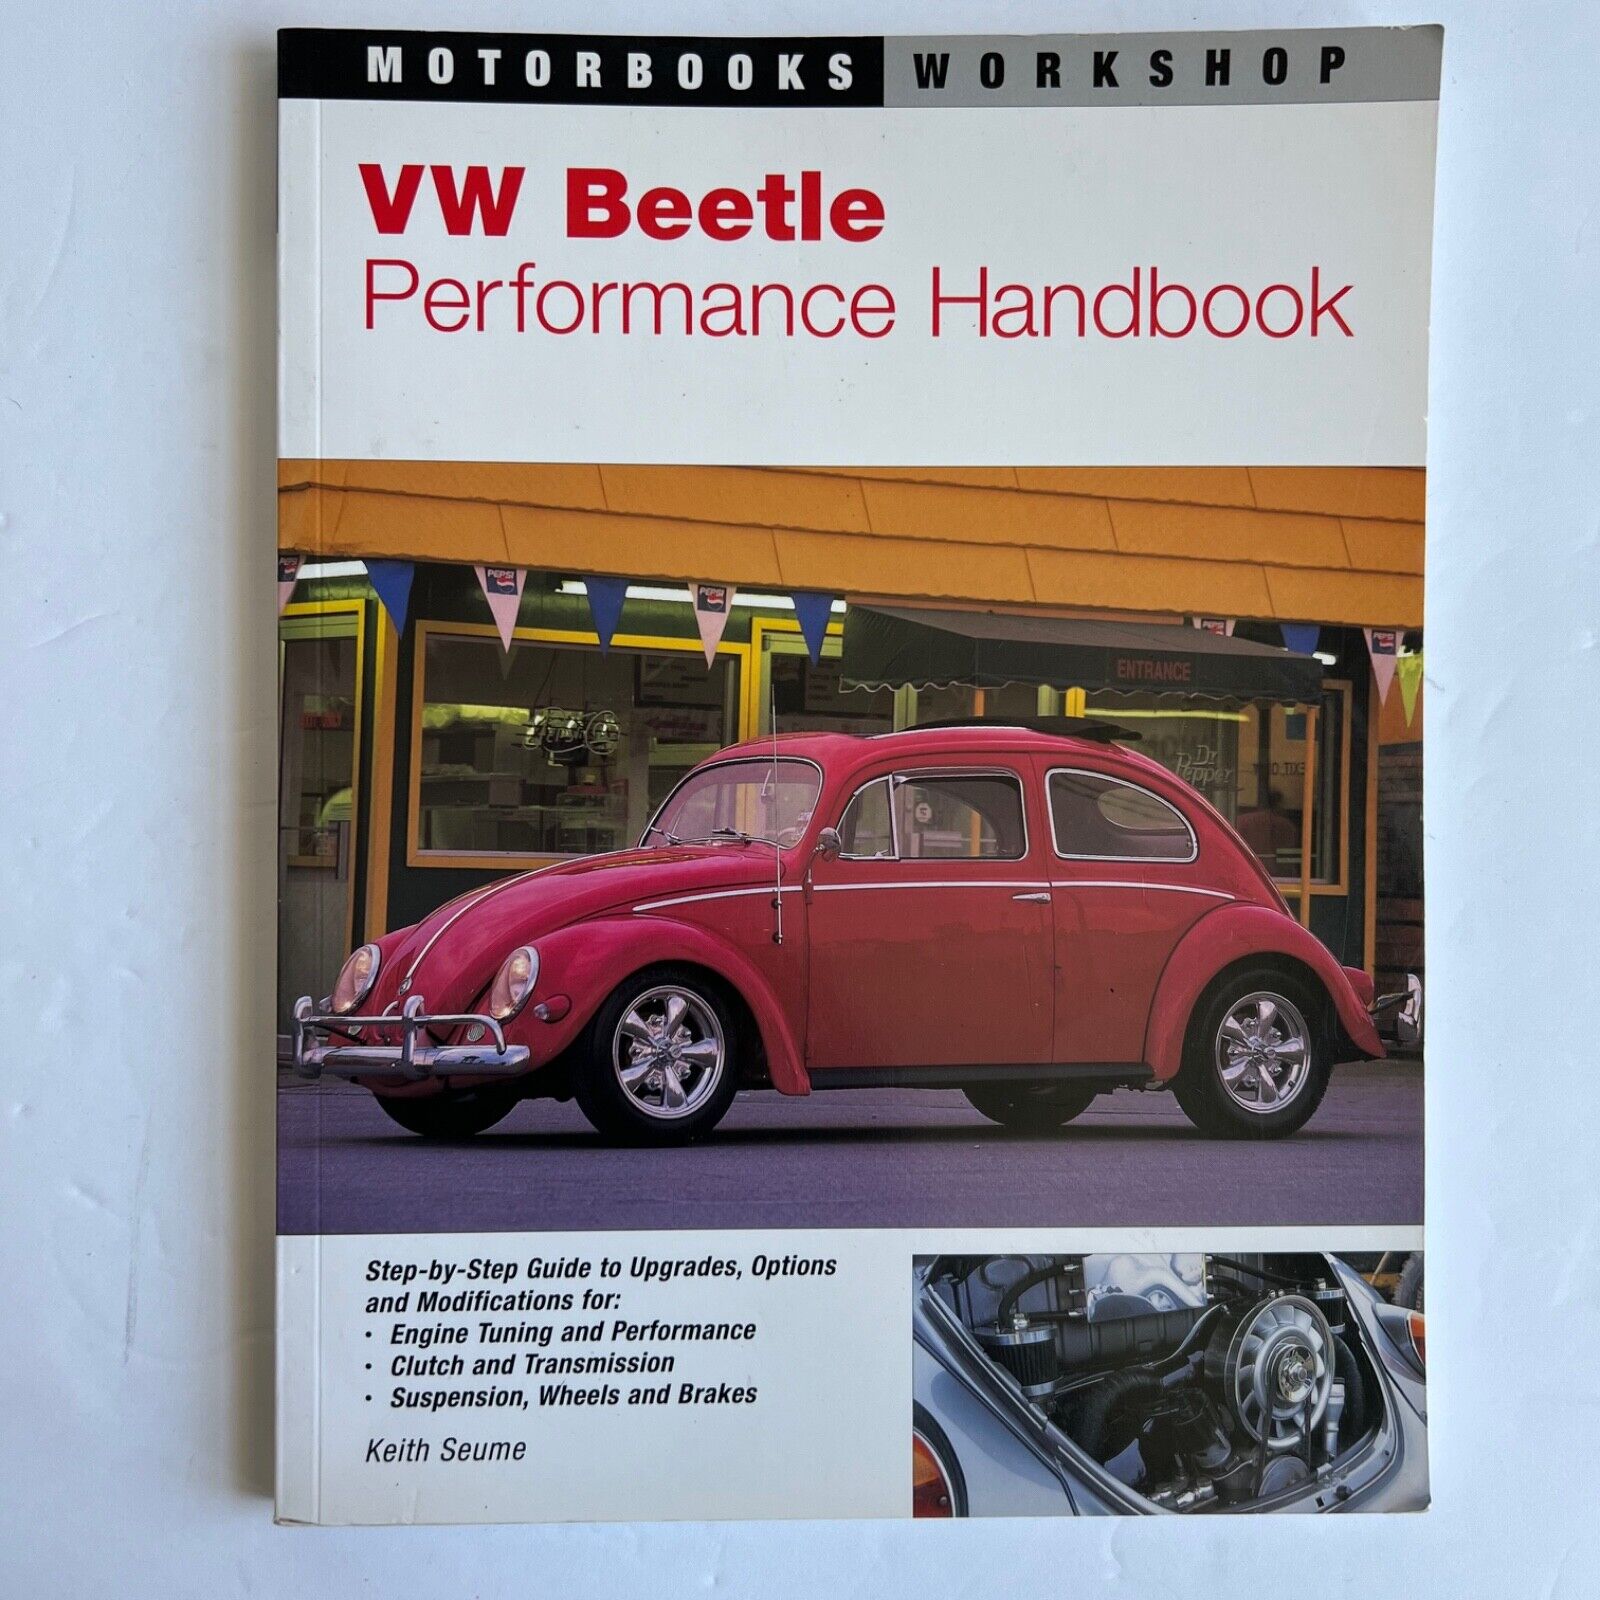 VW Beetle Performance Handbook by Keith Seume 1997 guide to upgrades options mod